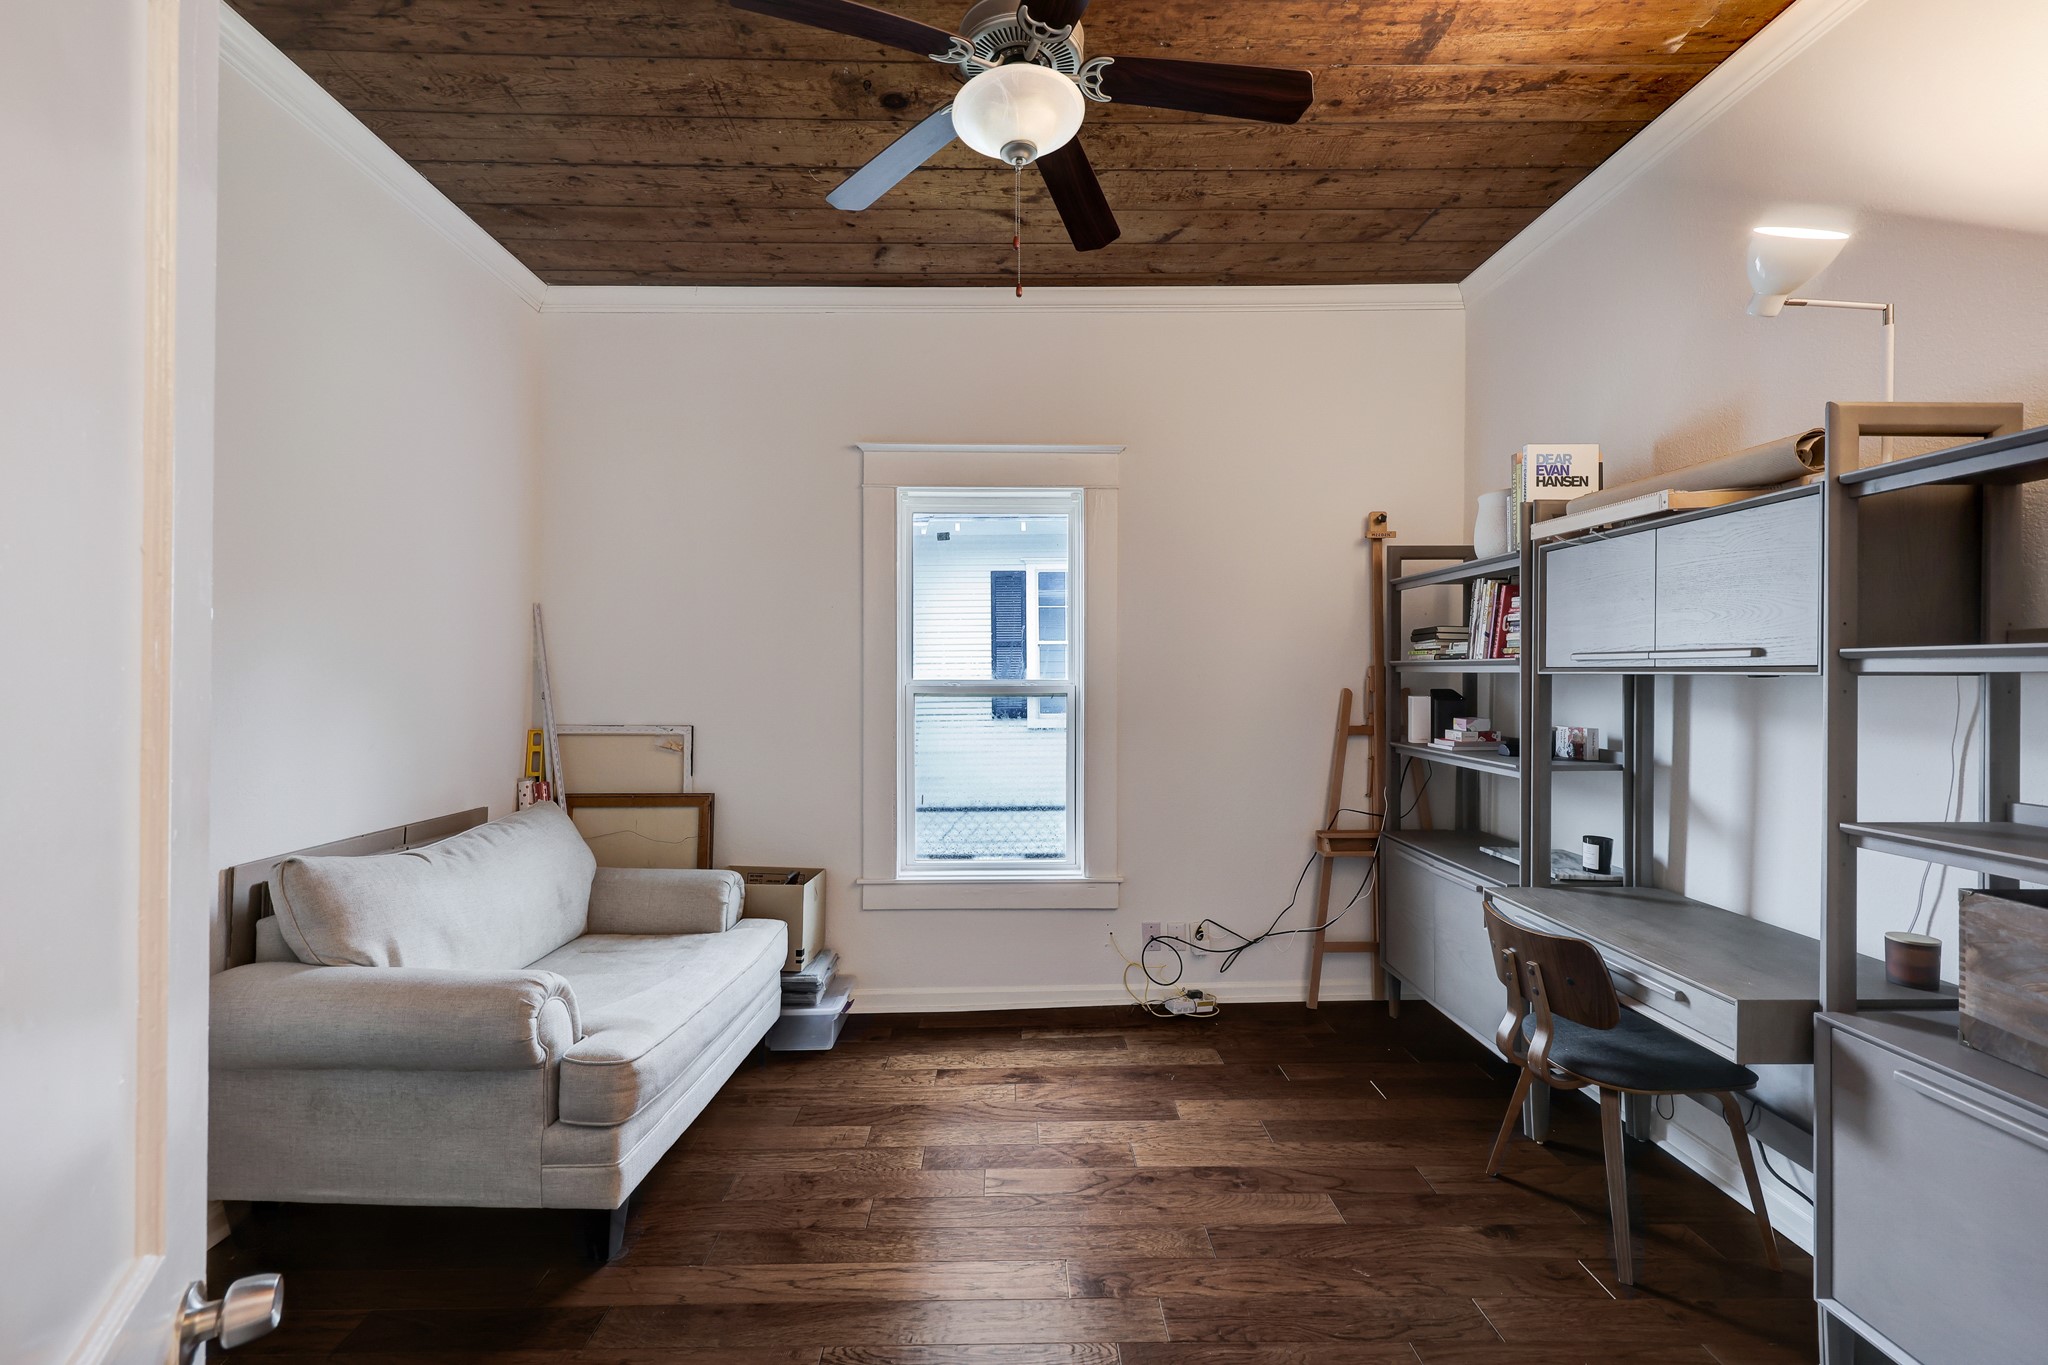 This secondary room measures approx 13'x13', and is the only bedroom that features the shiplap ceilings.